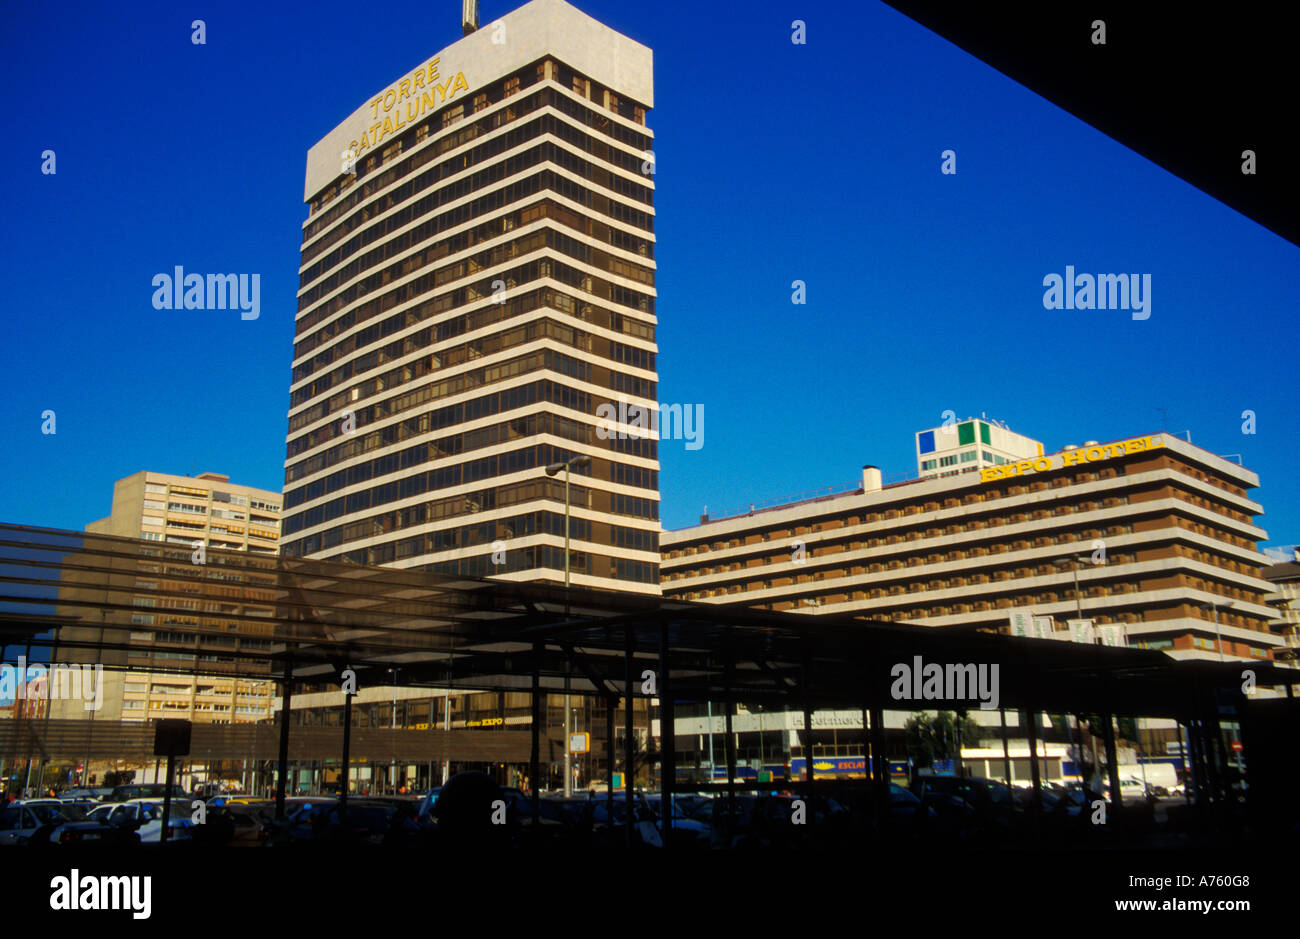 Area Sants with modern architecture and railway station Stock Photo